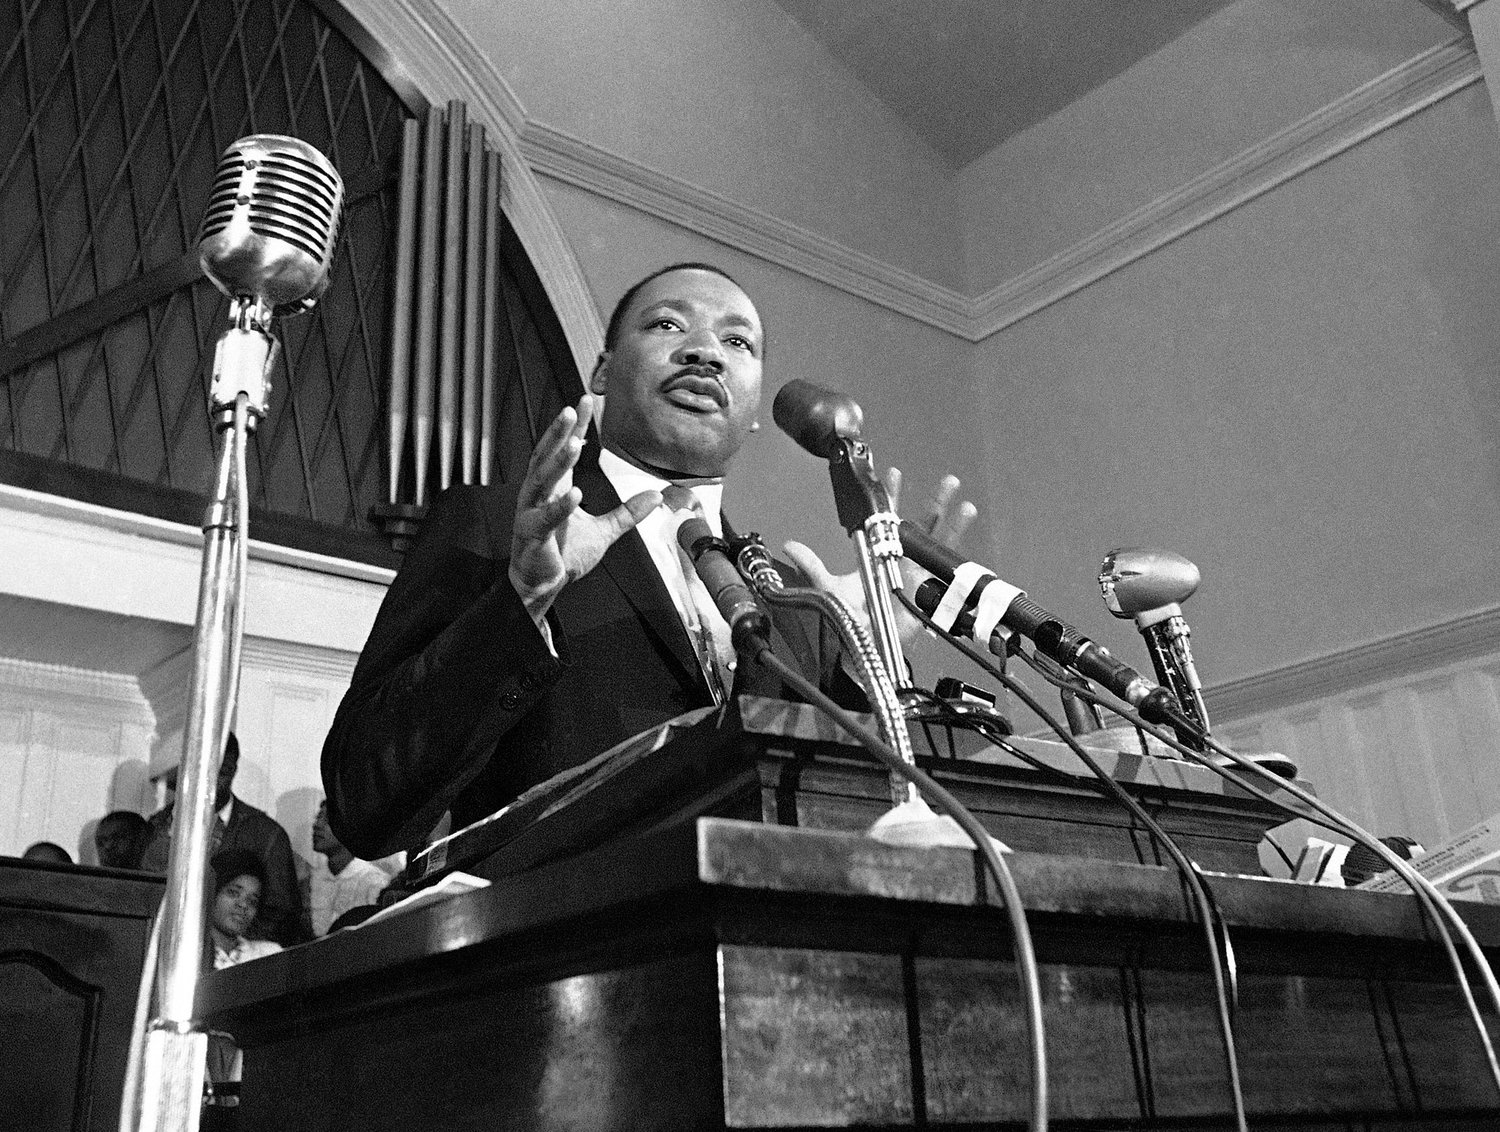 FILE - In this 1960 file photo, Martin Luther King Jr. speaks in Atlanta. The civil rights leader had carried the banner for the causes of social justice ‚Äî organizing protests, leading marches and making powerful speeches exposing the scourges of segregation, poverty and racism. Following the publication of "An Appeal for Human Rights" on March 9, 1960, students at Atlanta's historically black colleges waged a nonviolent campaign of boycotts and sit-ins protesting segregation at restaurants, theaters, parks and government buildings. (AP Photo, File)